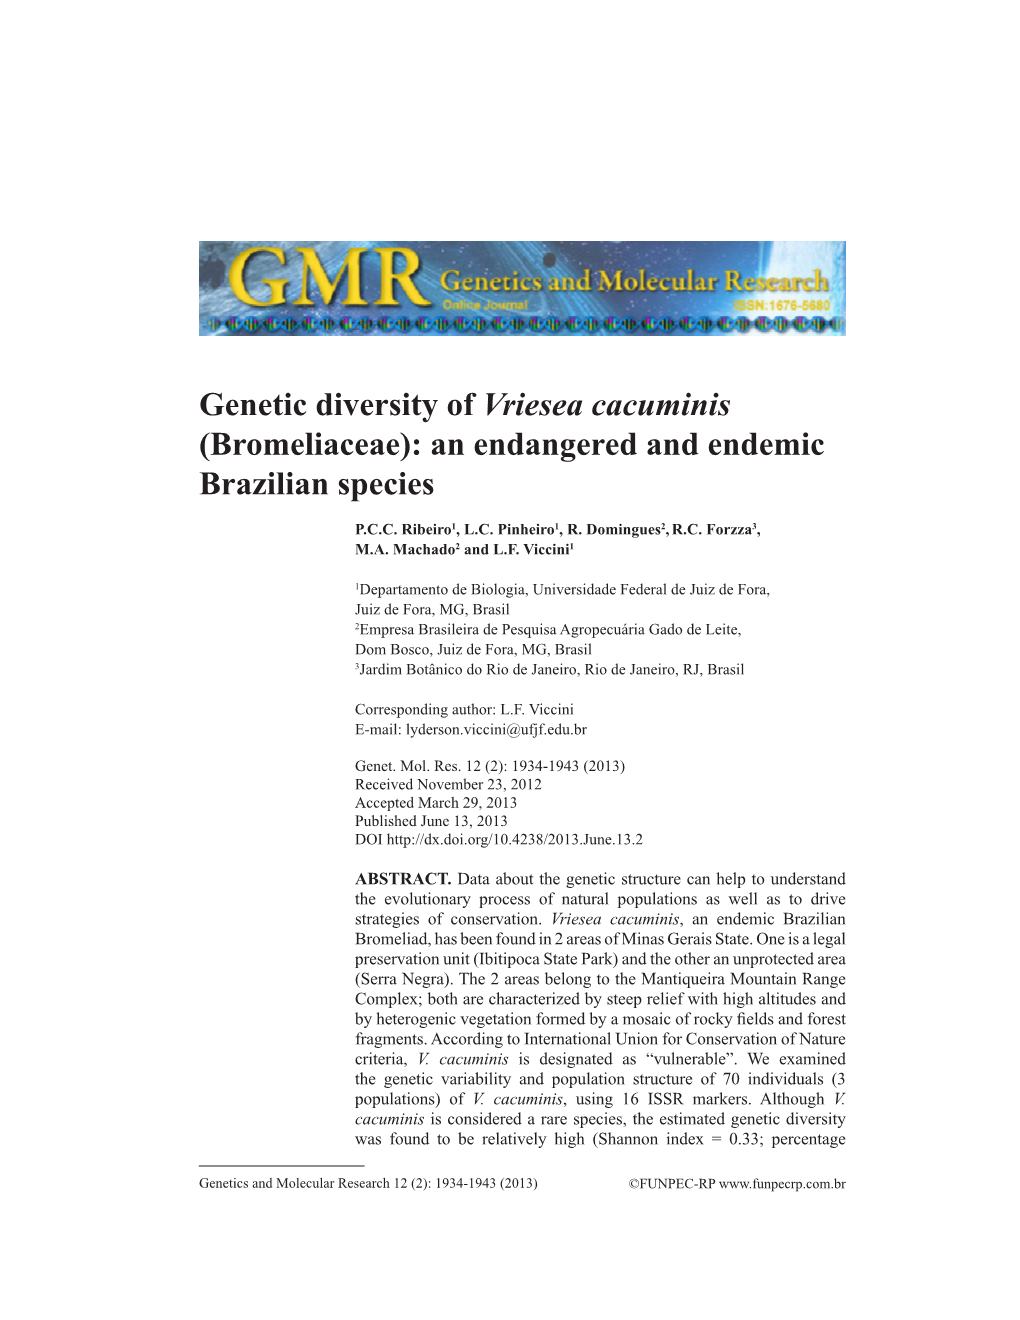 Genetic Diversity of Vriesea Cacuminis (Bromeliaceae): an Endangered and Endemic Brazilian Species